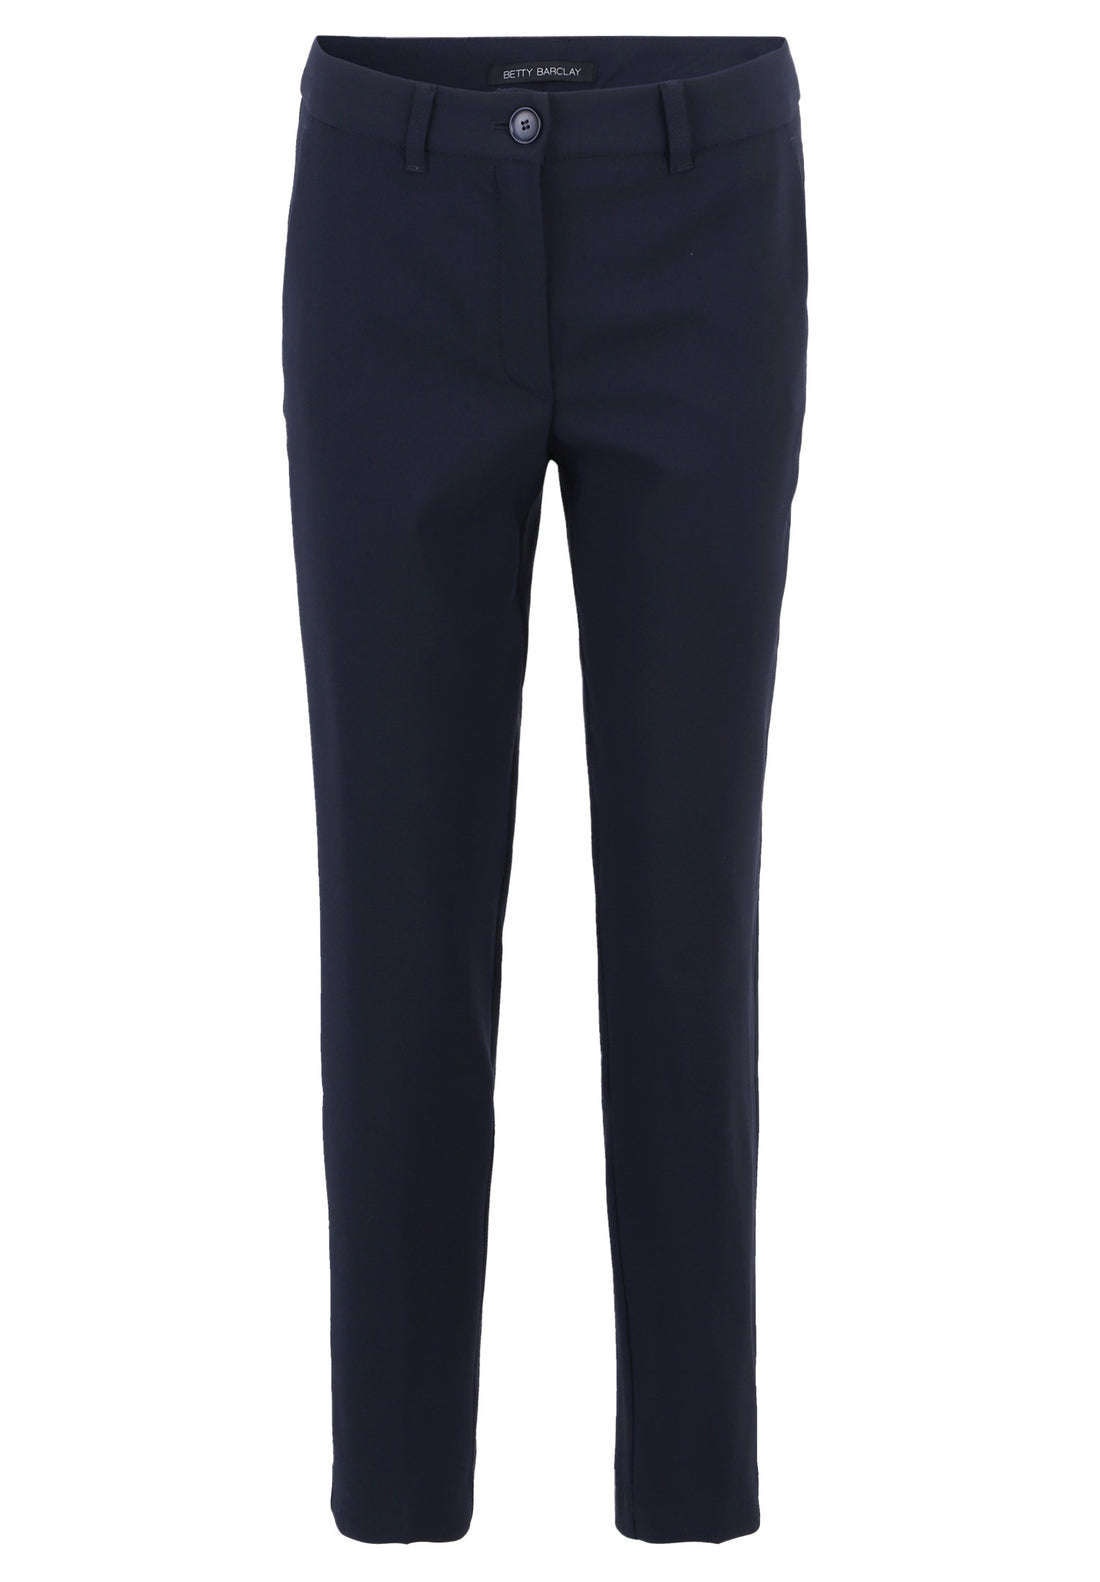 Business Trousers
With Crease_6002-1080_8345_02